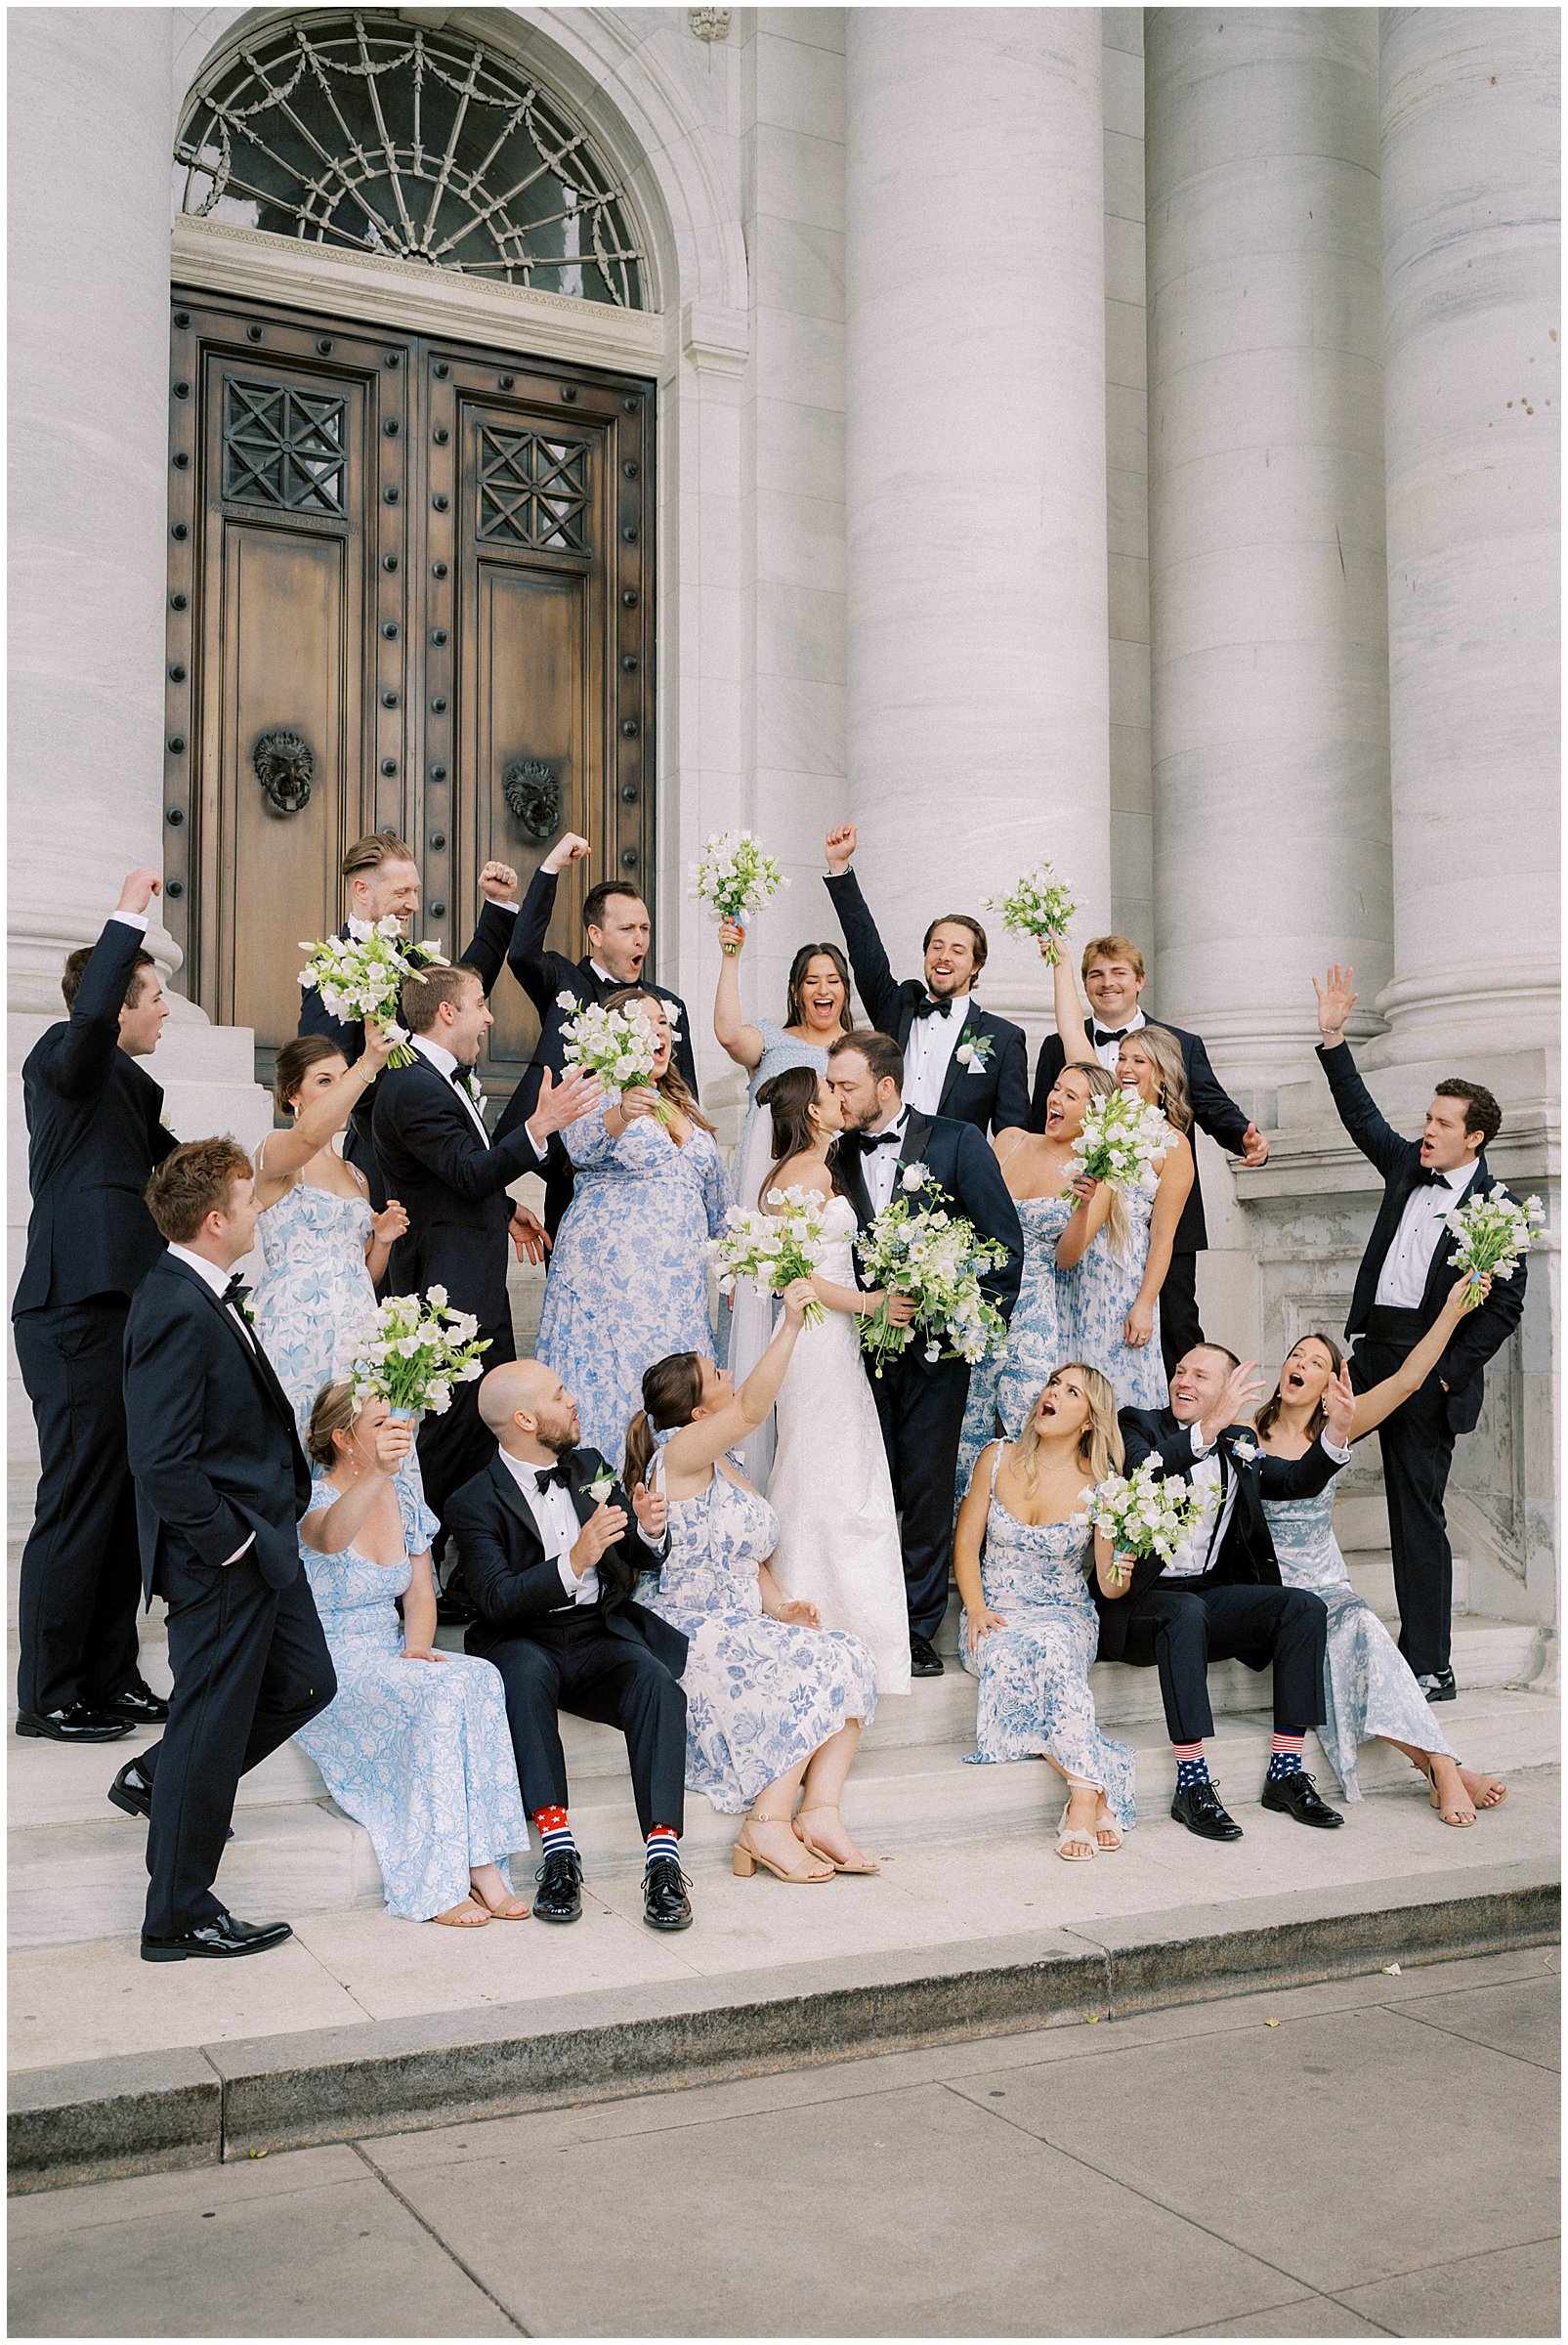 Wedding party portraits at DAR Constitution Hall in Washington, DC